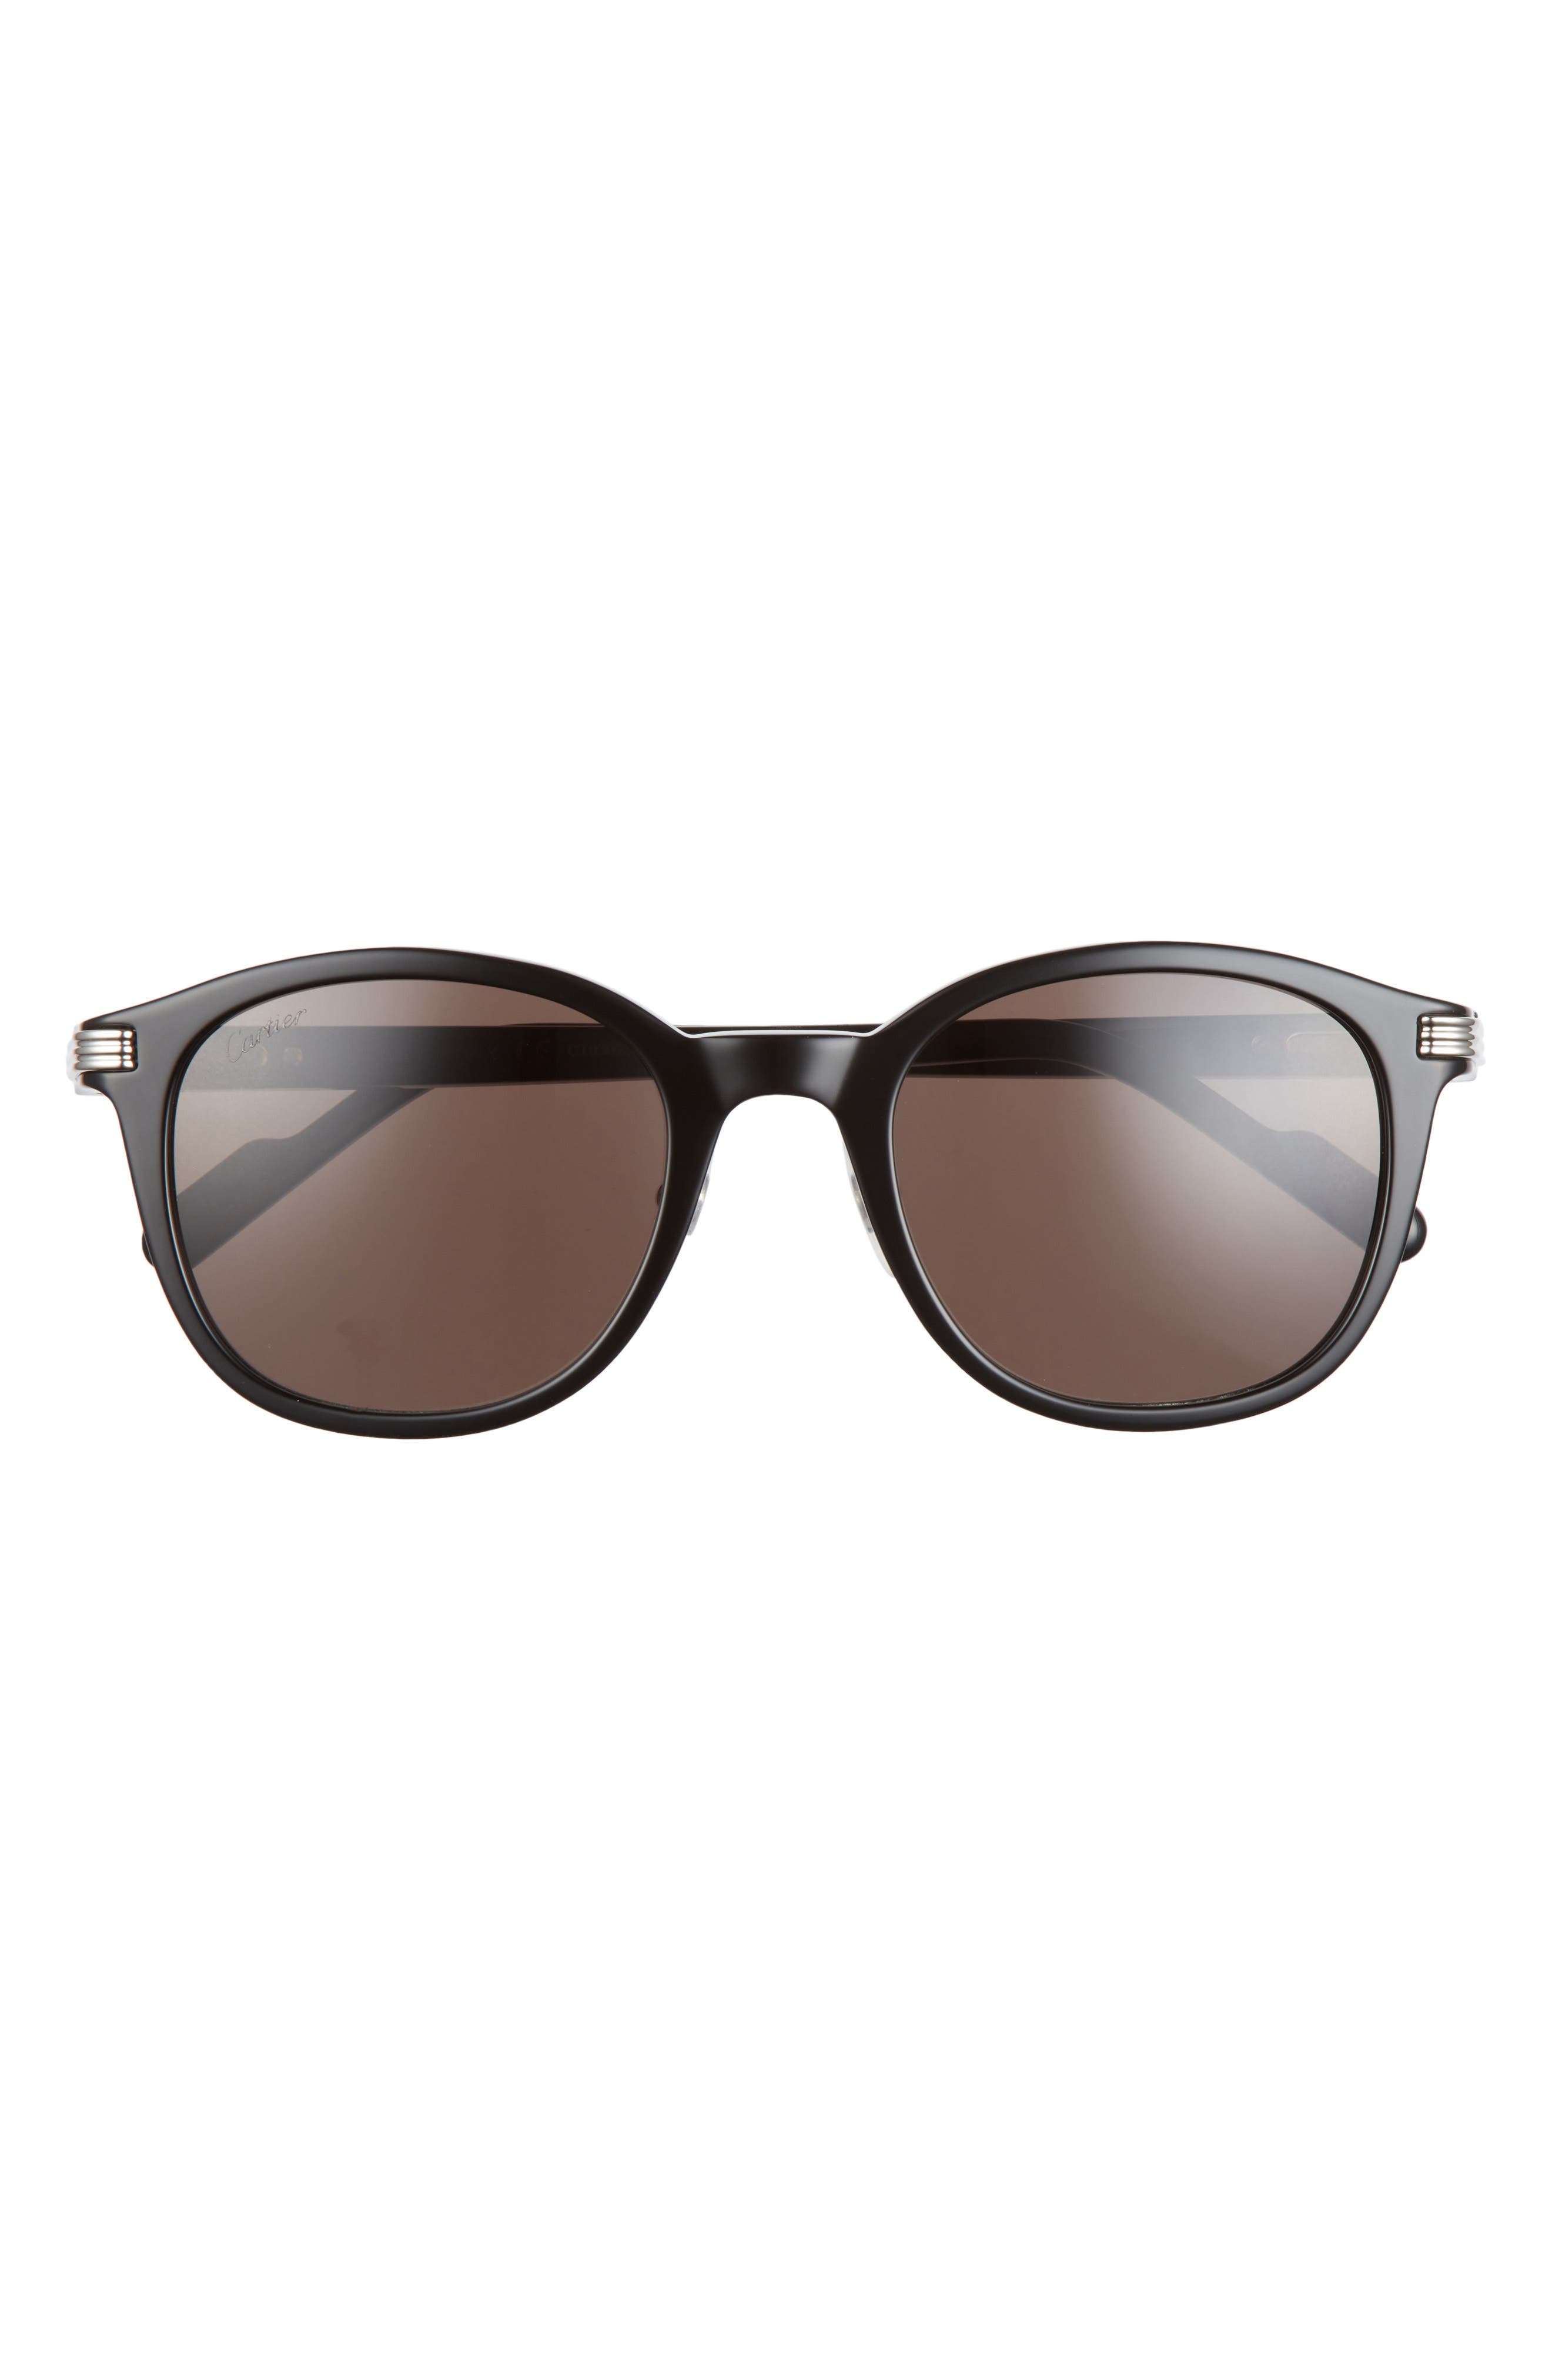 Cartier 53mm Round Sunglasses in Black at Nordstrom